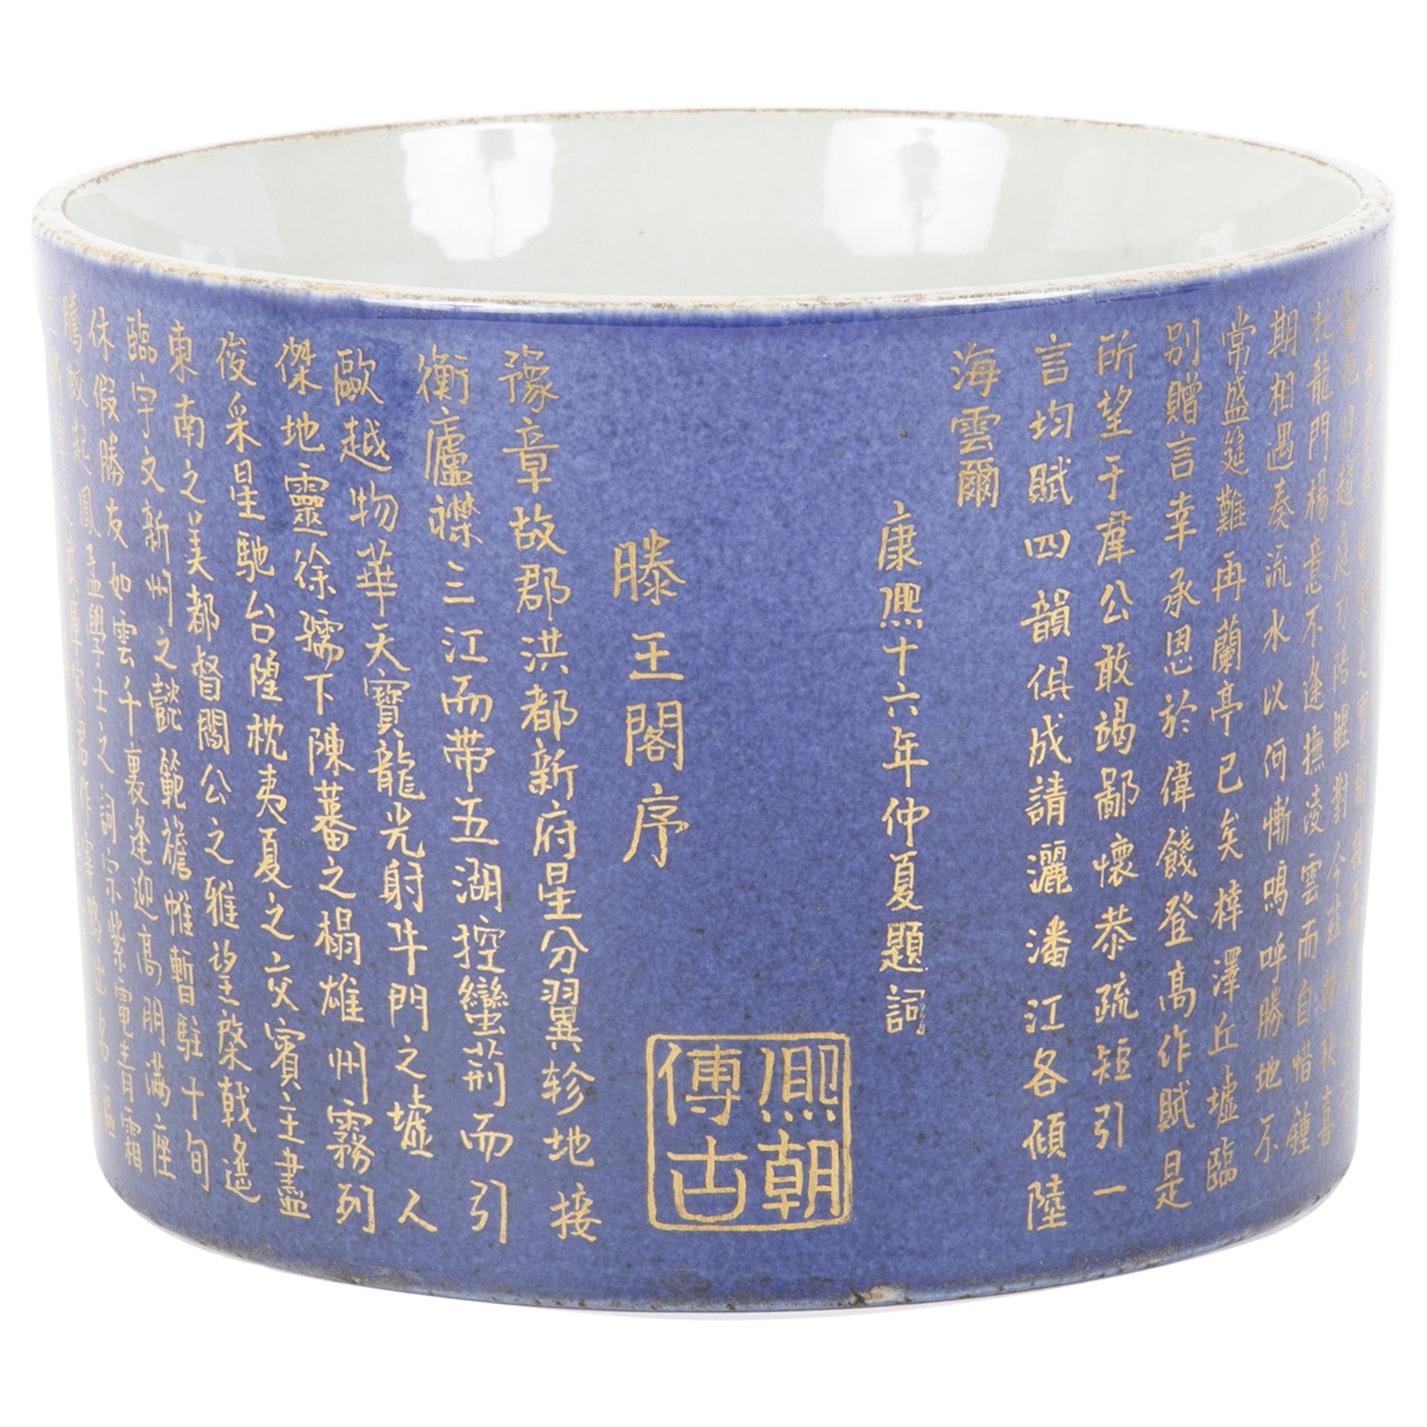 Powder Blue and Gilt Chinese Brush Pot with Calligraphy Decoration